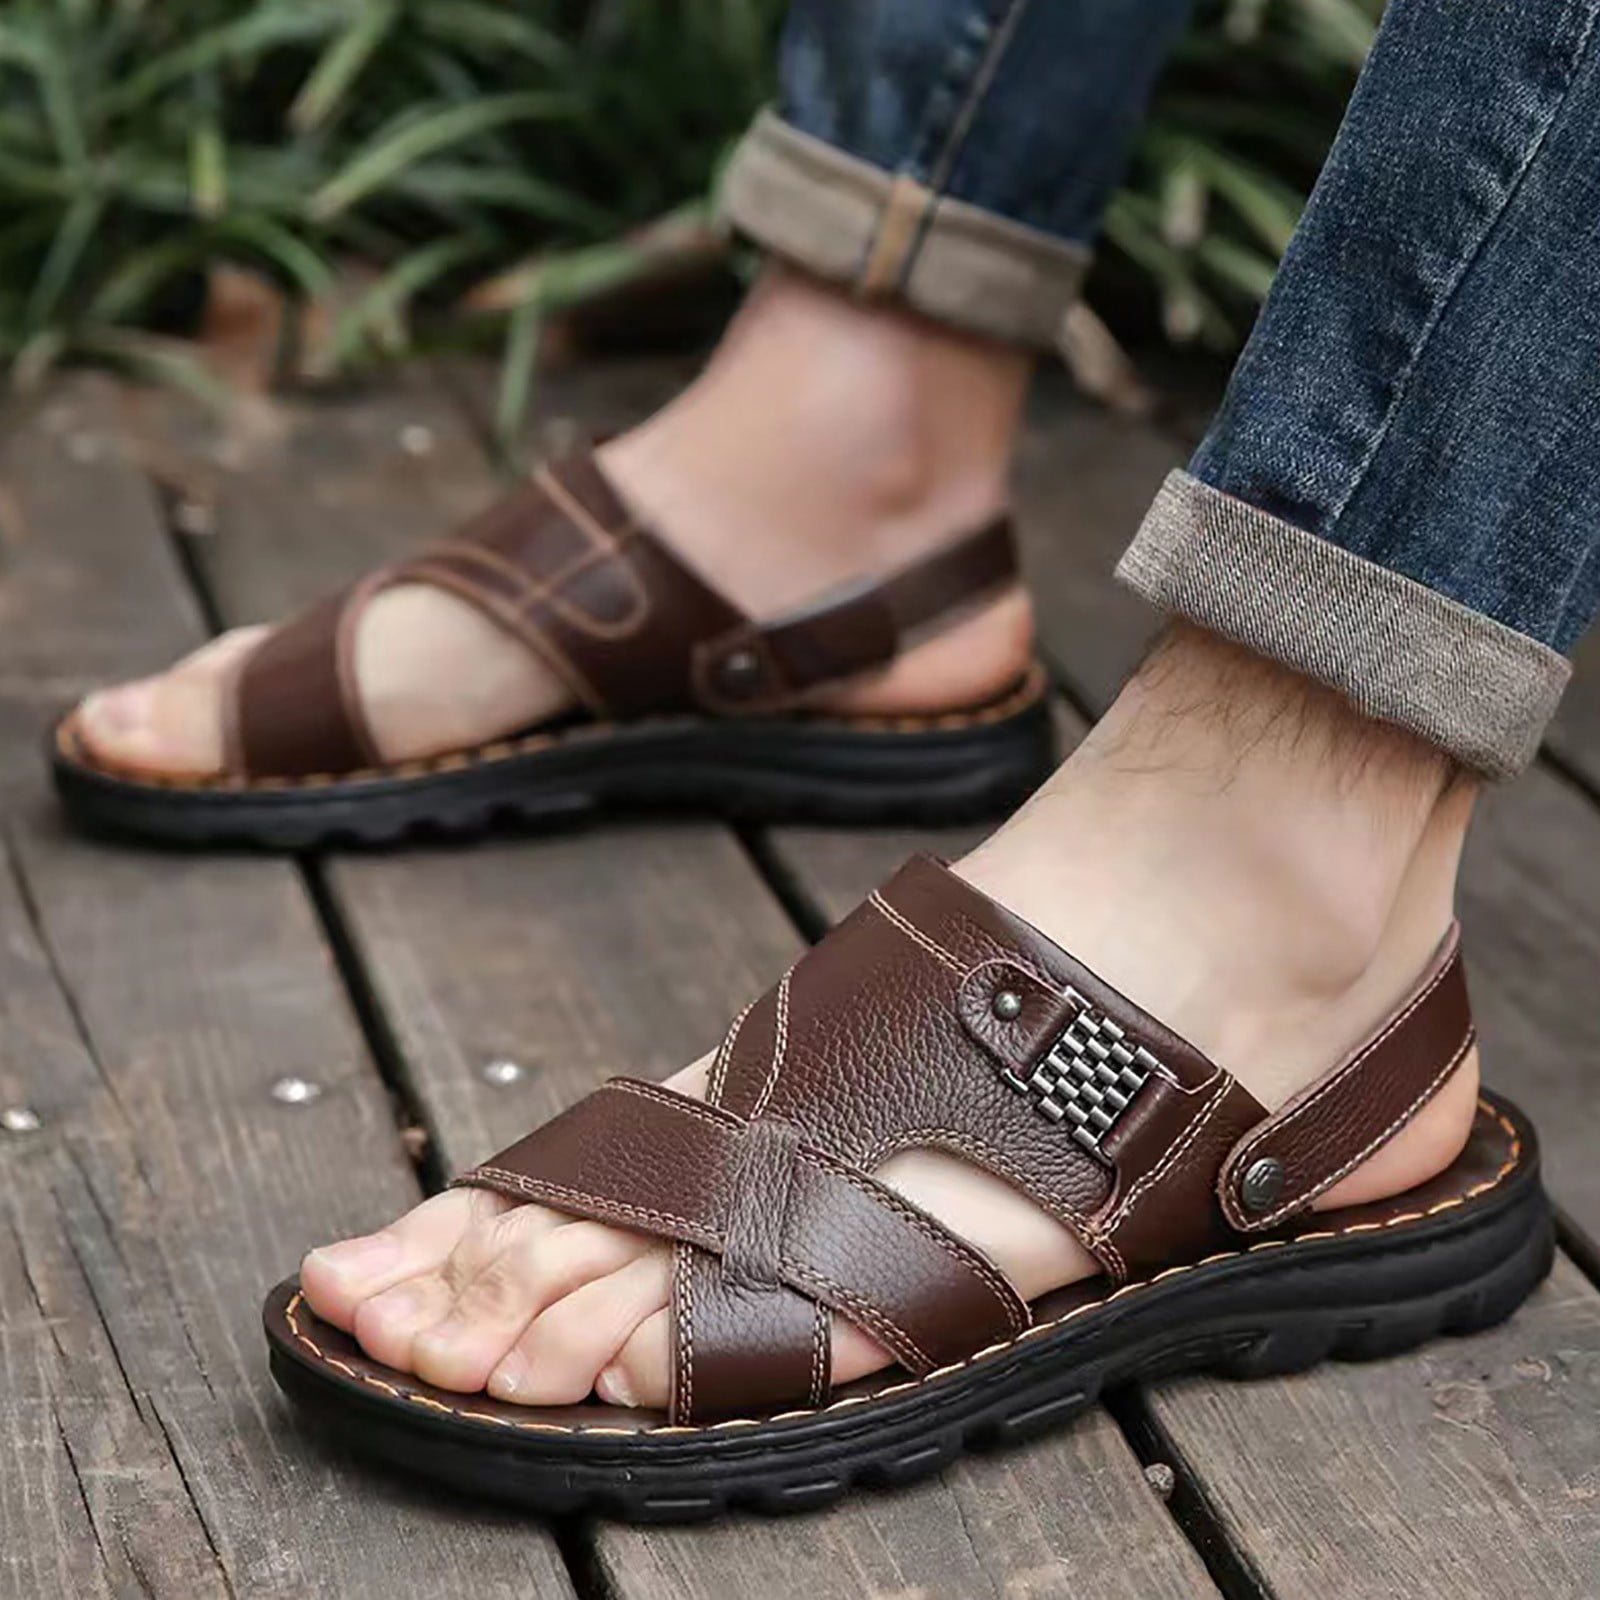 kpoplk Sandals,Men Leather Sandals Summer Casual Vacation Shoes Non-Slip Sneakers(Brown) - Walmart.com